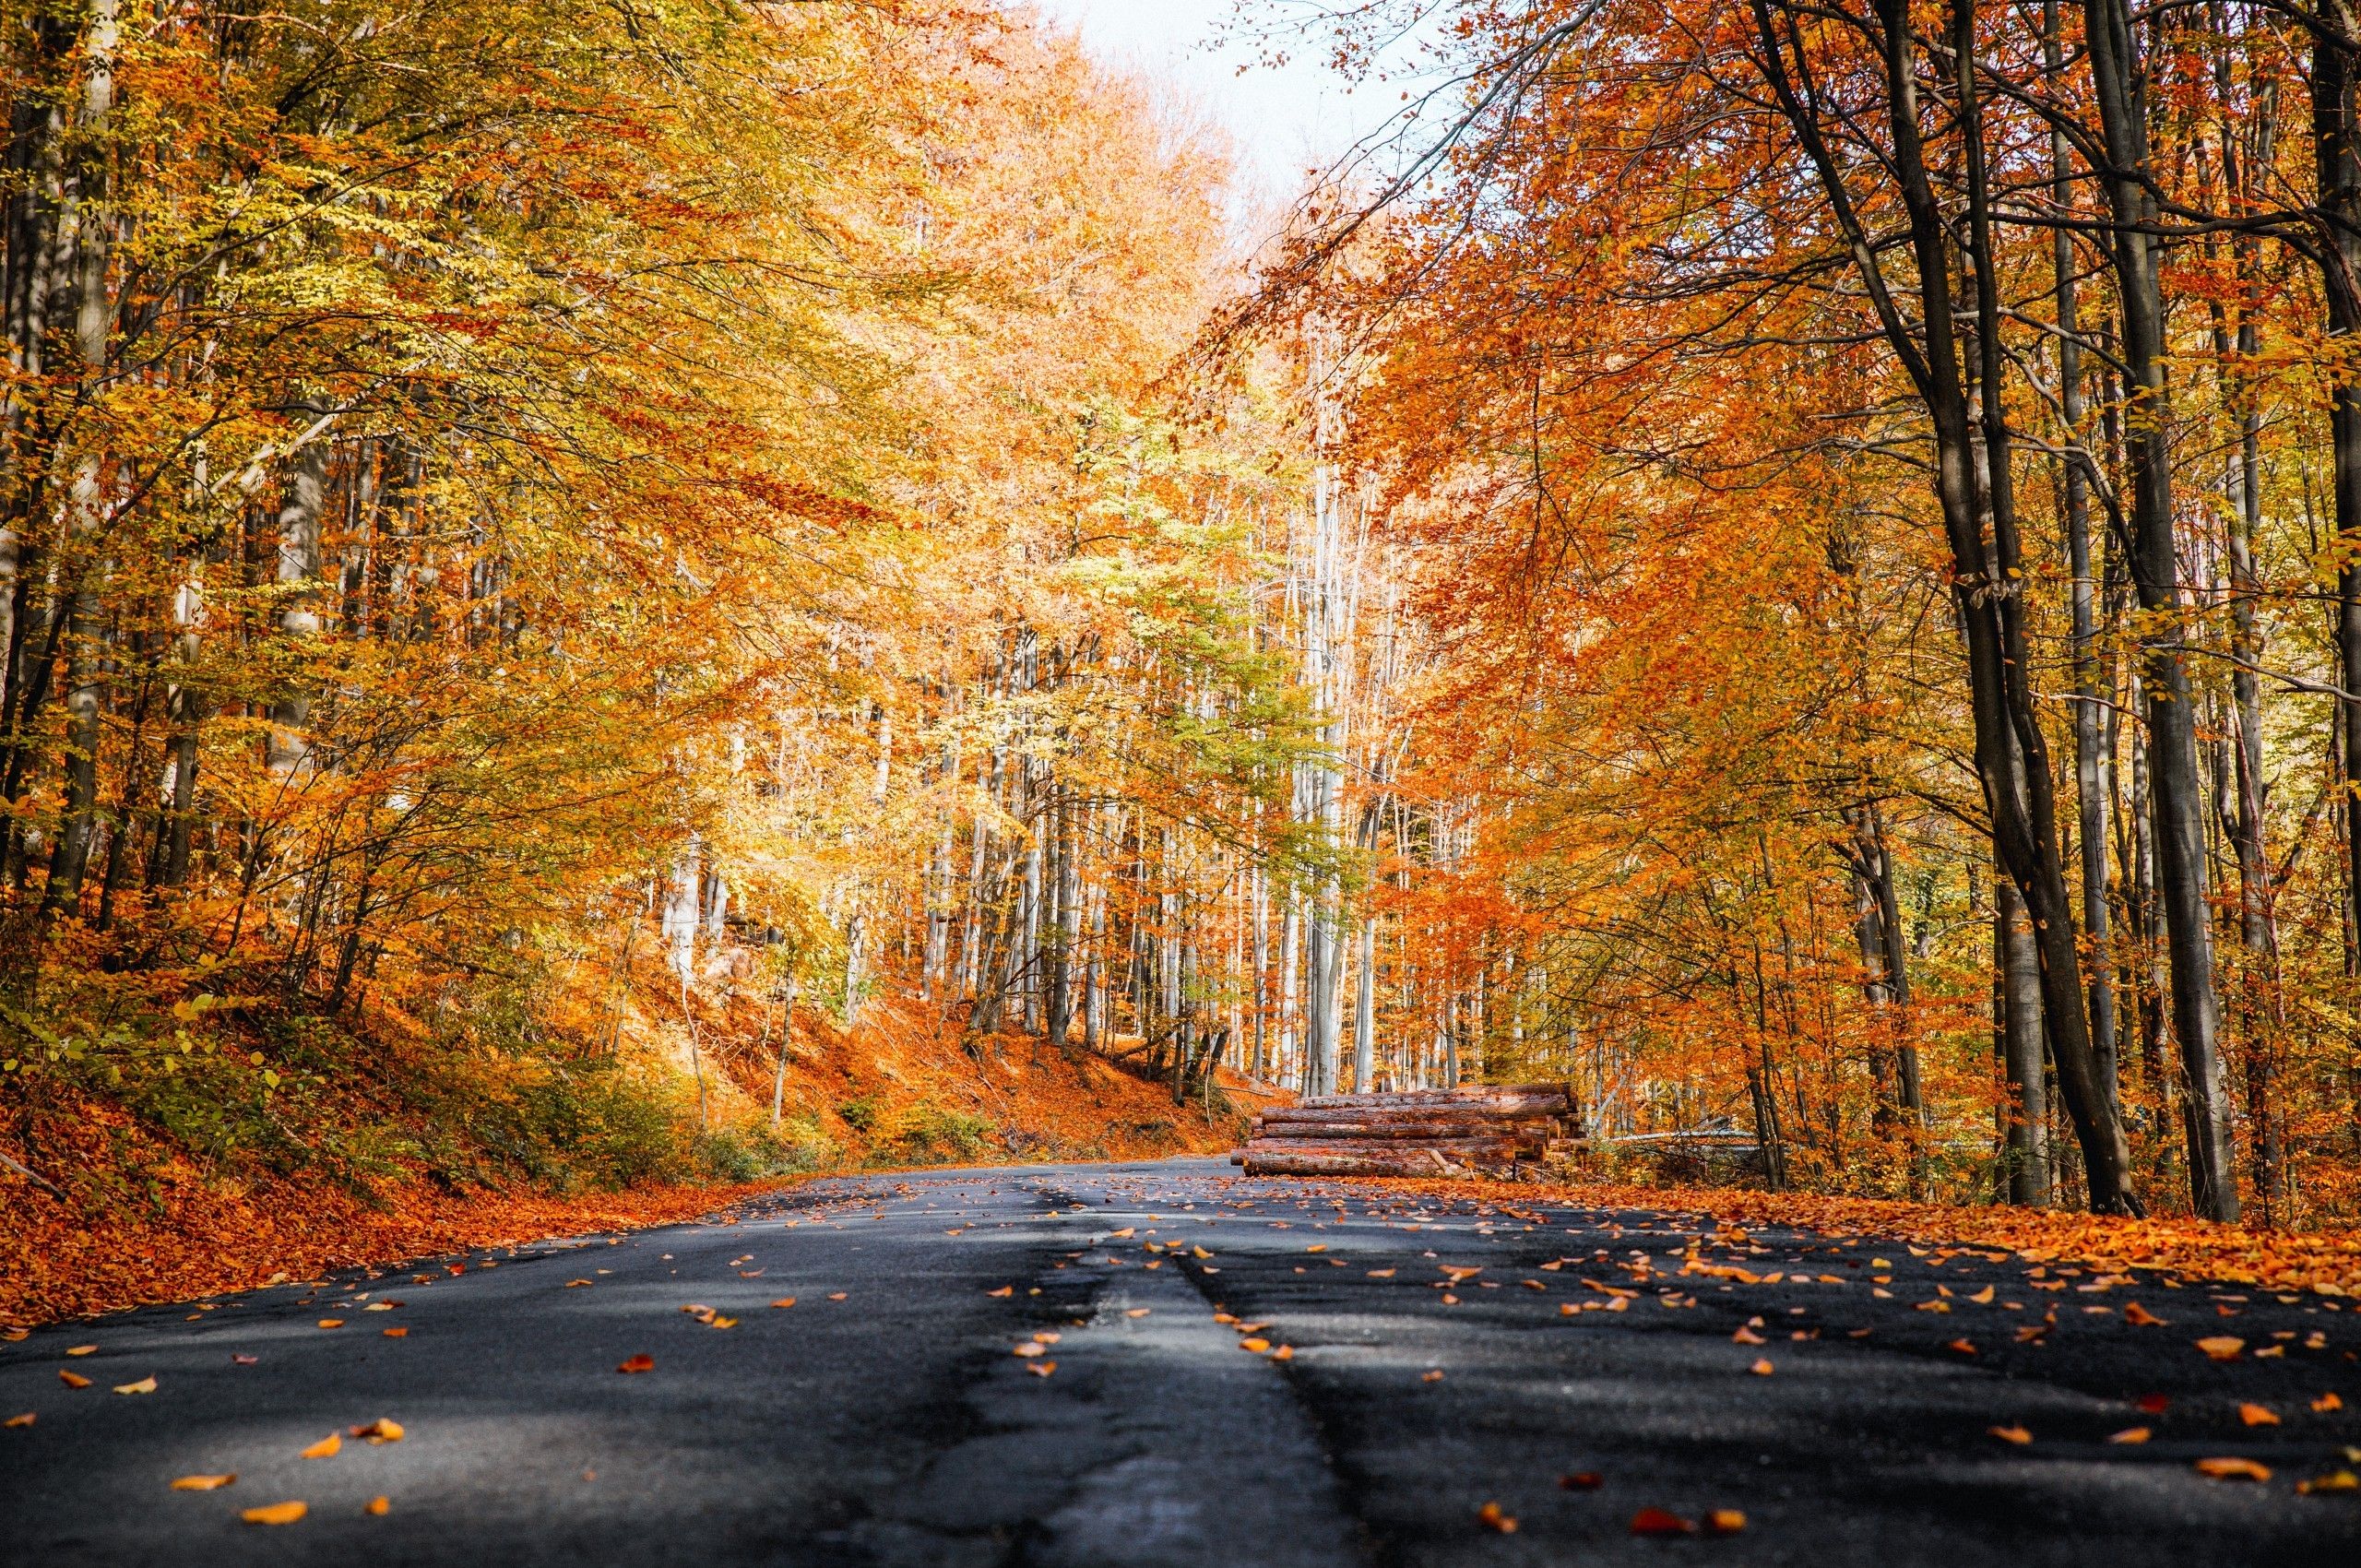 Download 2560x1700 Autumn, Road, Forest, Trees, Fall Wallpaper for Chromebook Pixel